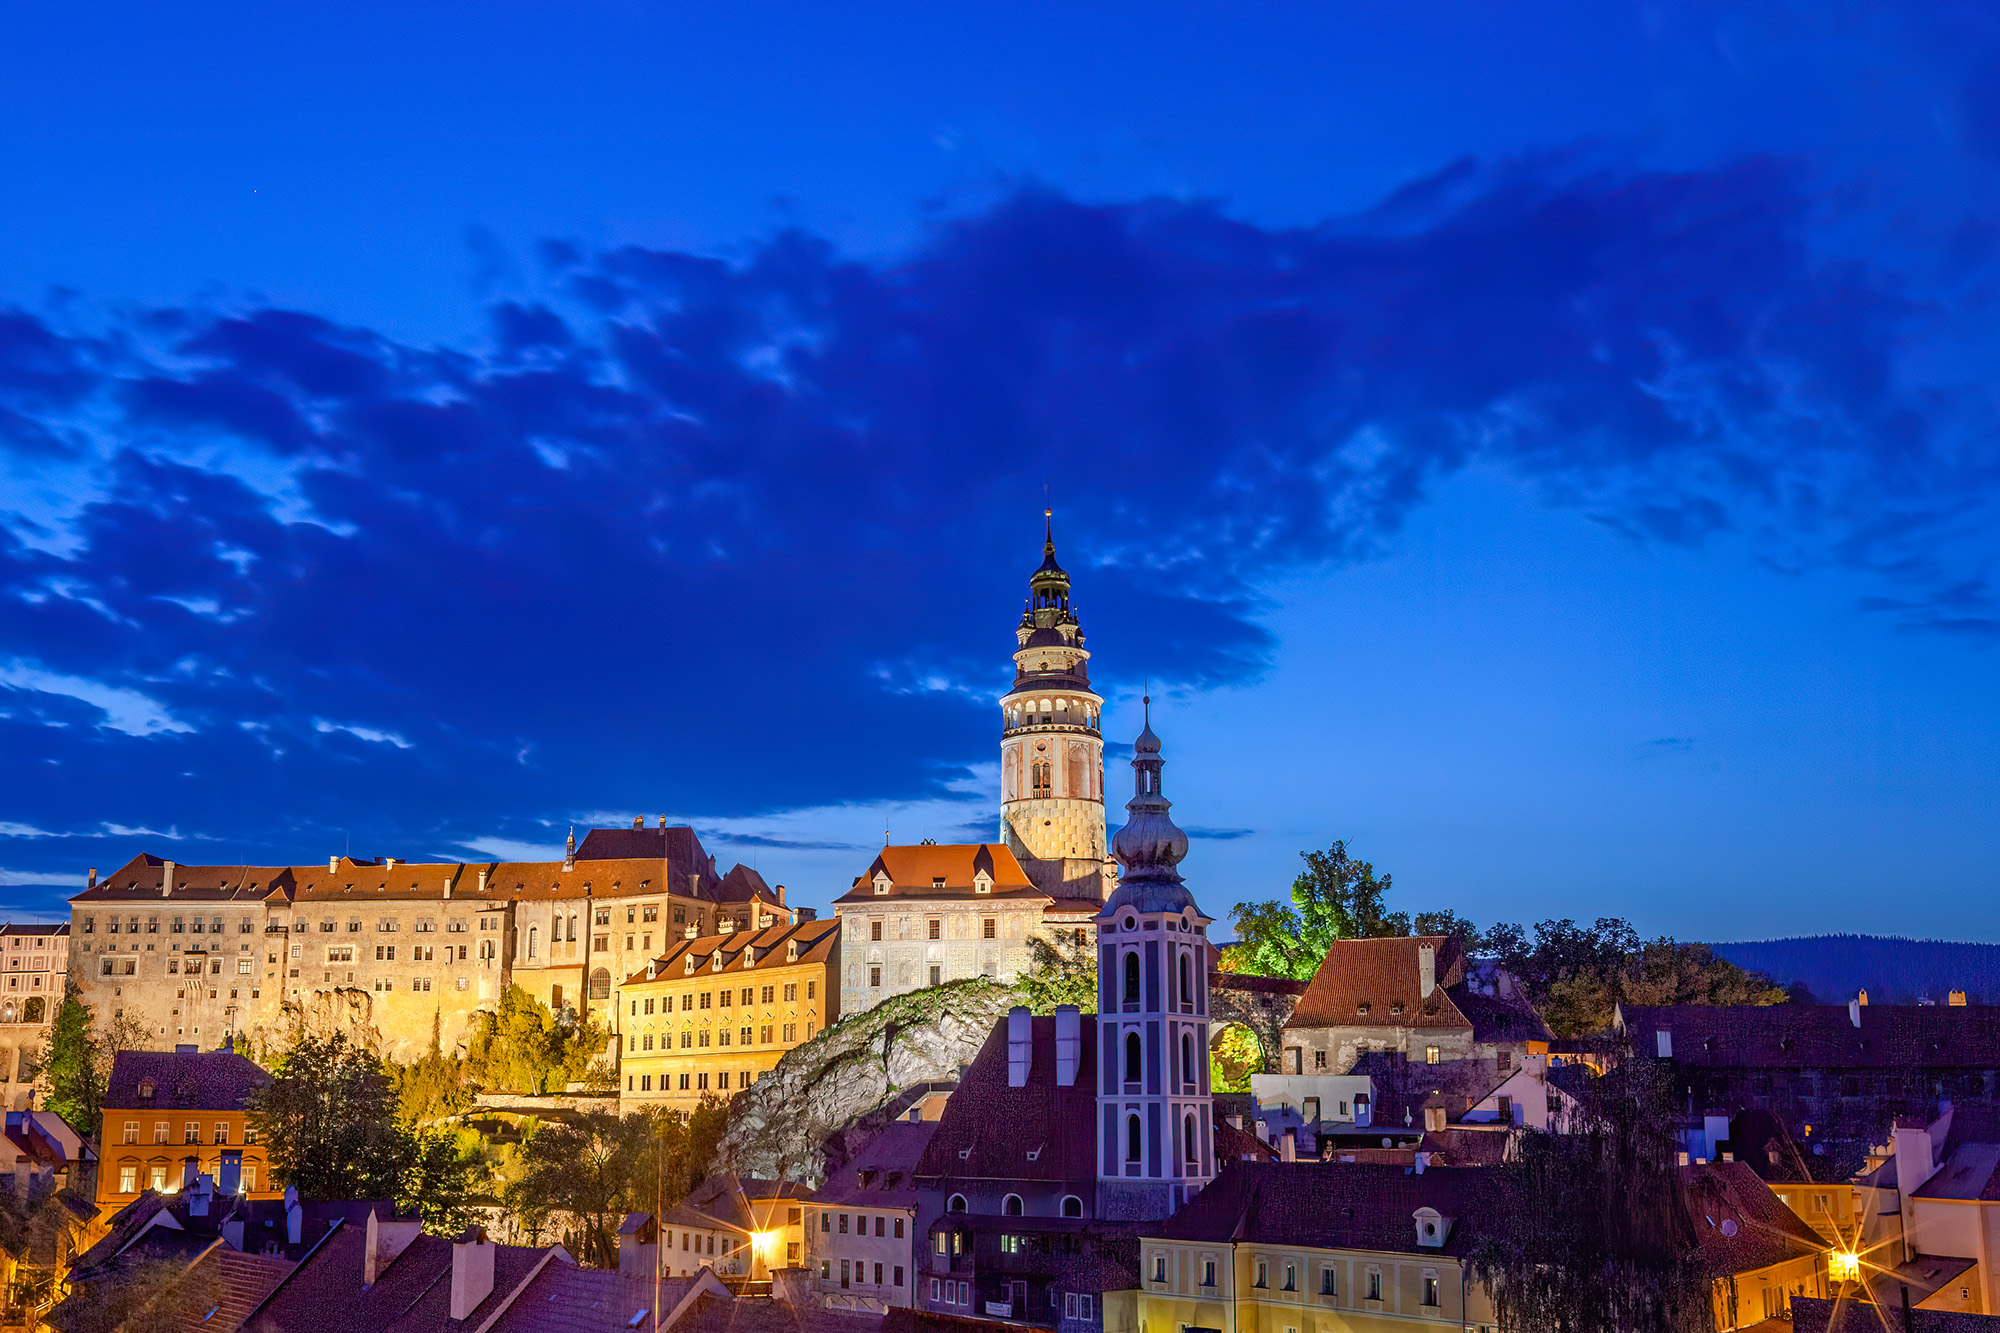 At the bewitching hour of twilight, the State Castle and Chateau of Český Krumlov, Czech Republic, assumes a regal aura. Illuminated...